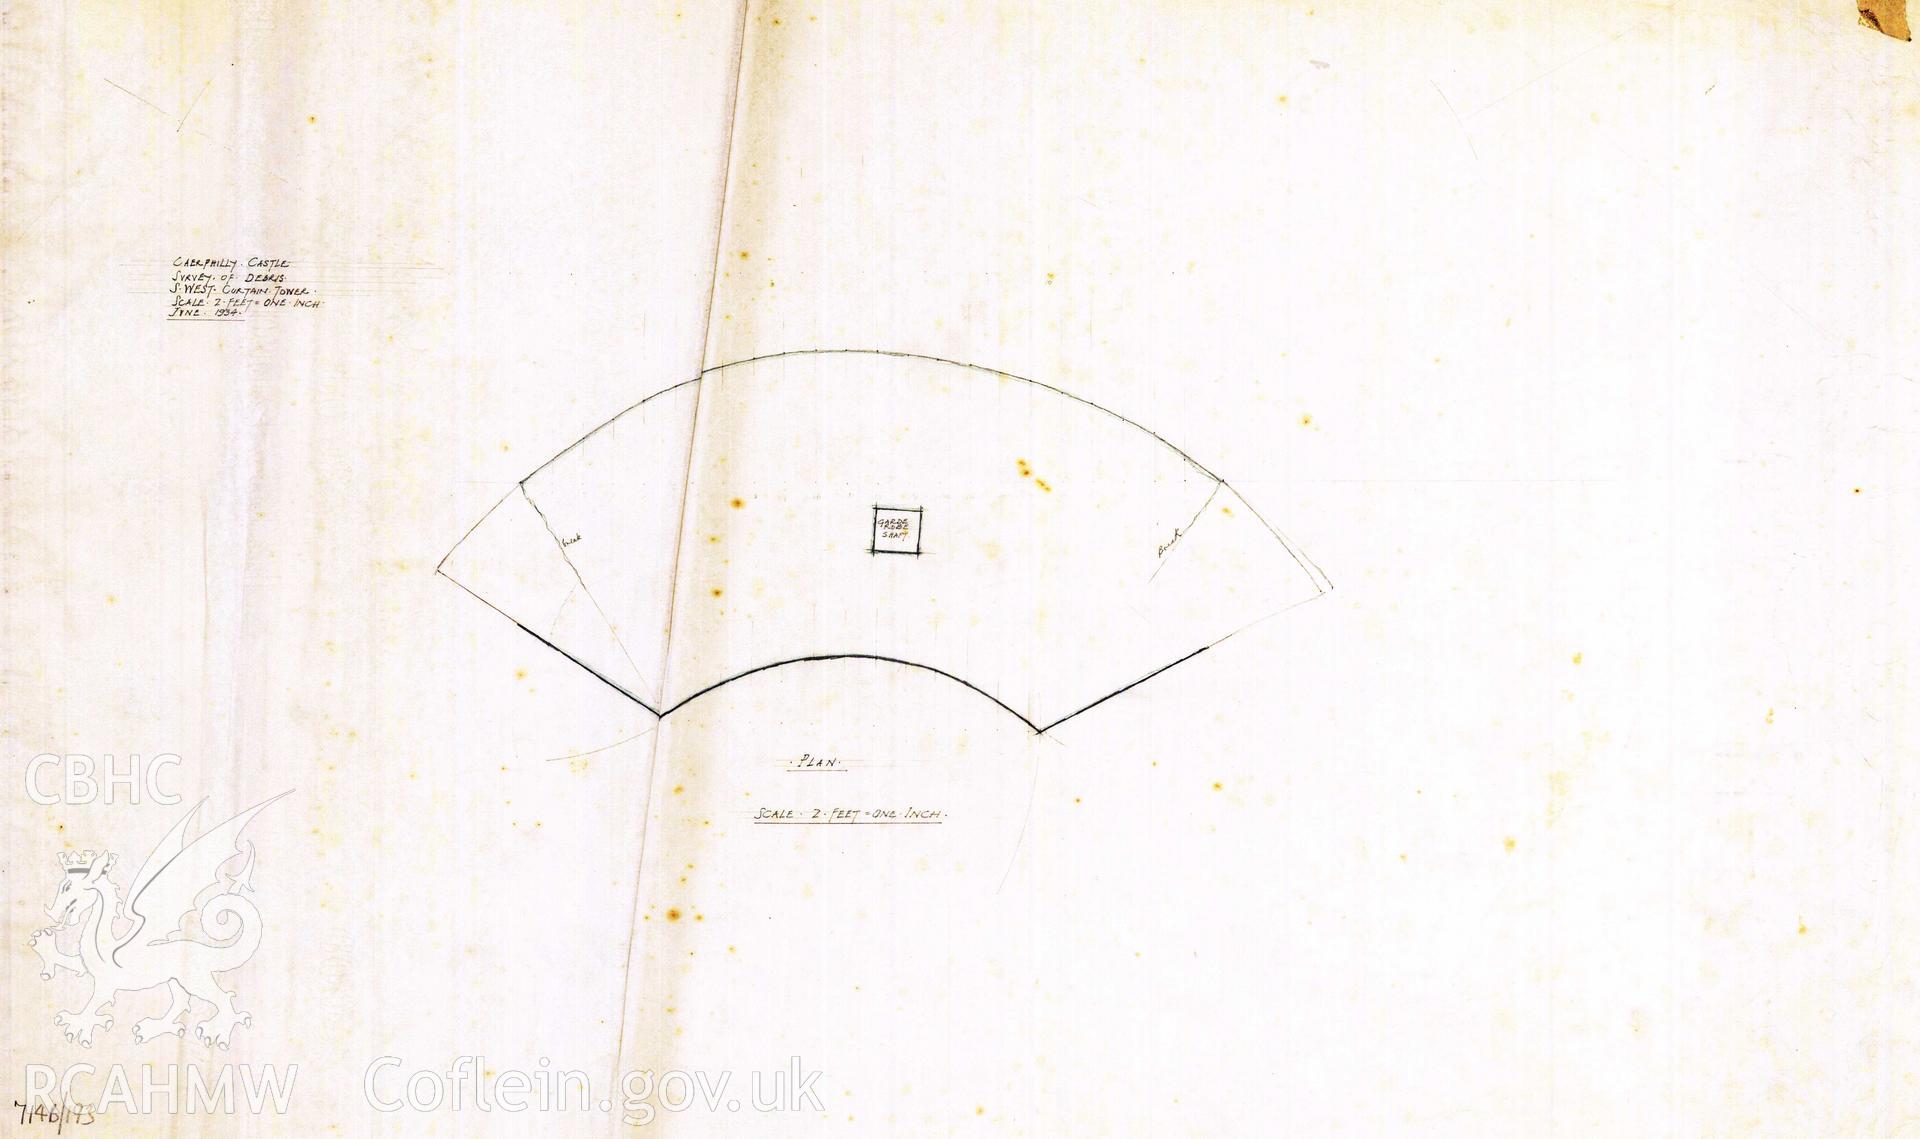 Cadw guardianship monument drawing of Caerphilly Castle. SW tower, latrine-chute, plan. Cadw Ref. No:714B/193. Scale 1:24.